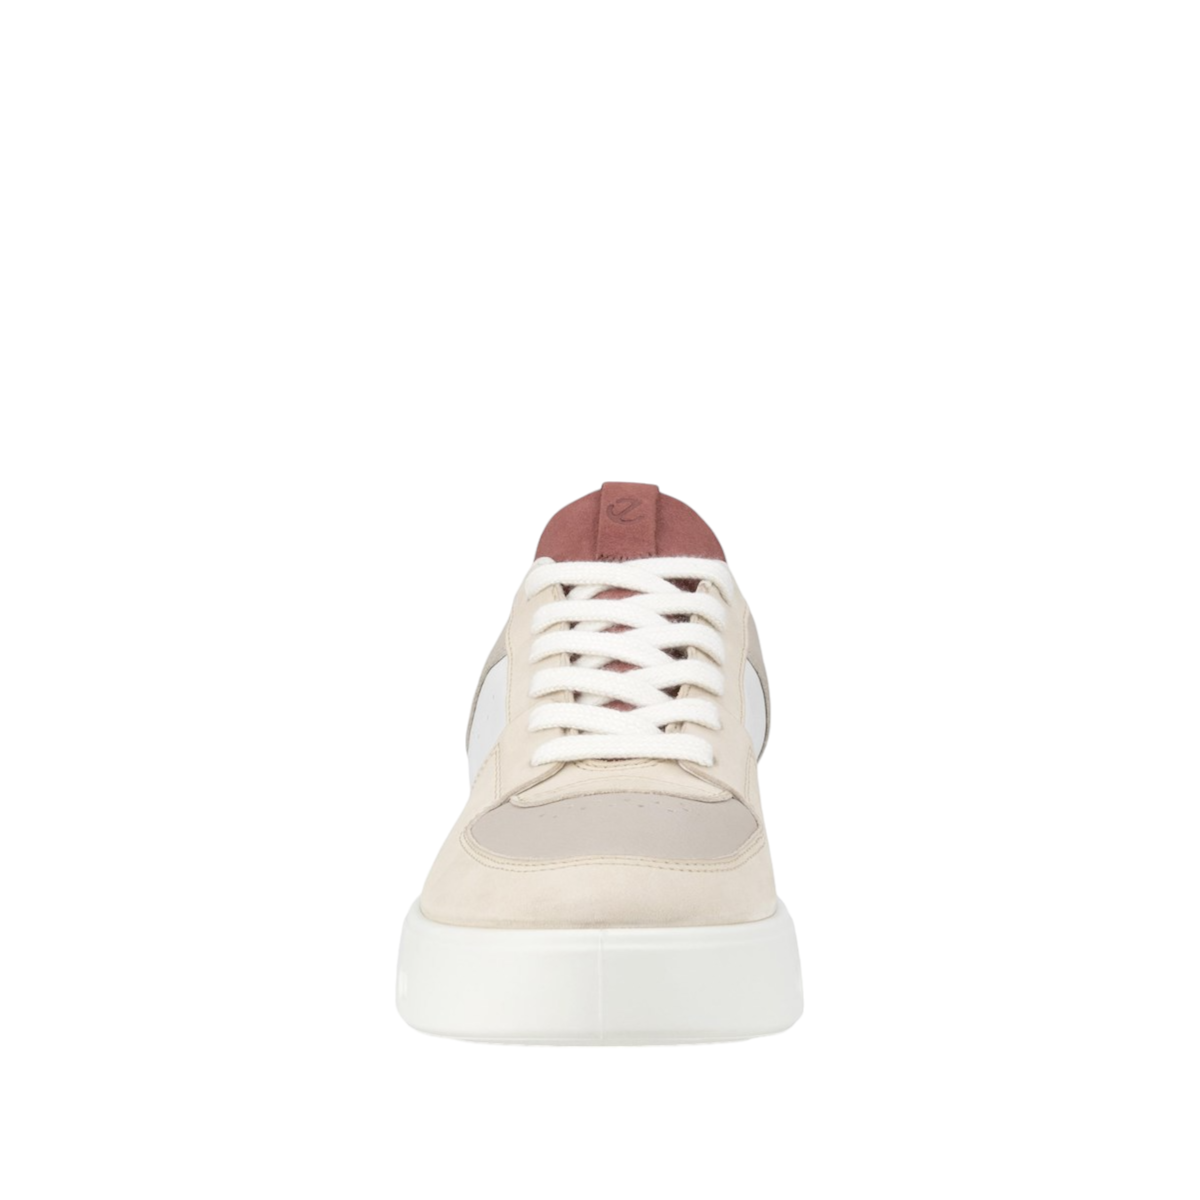 Shop Street 720 W - with shoe&amp;me - from Ecco - Sneakers - Sneakers, Winter, Womens